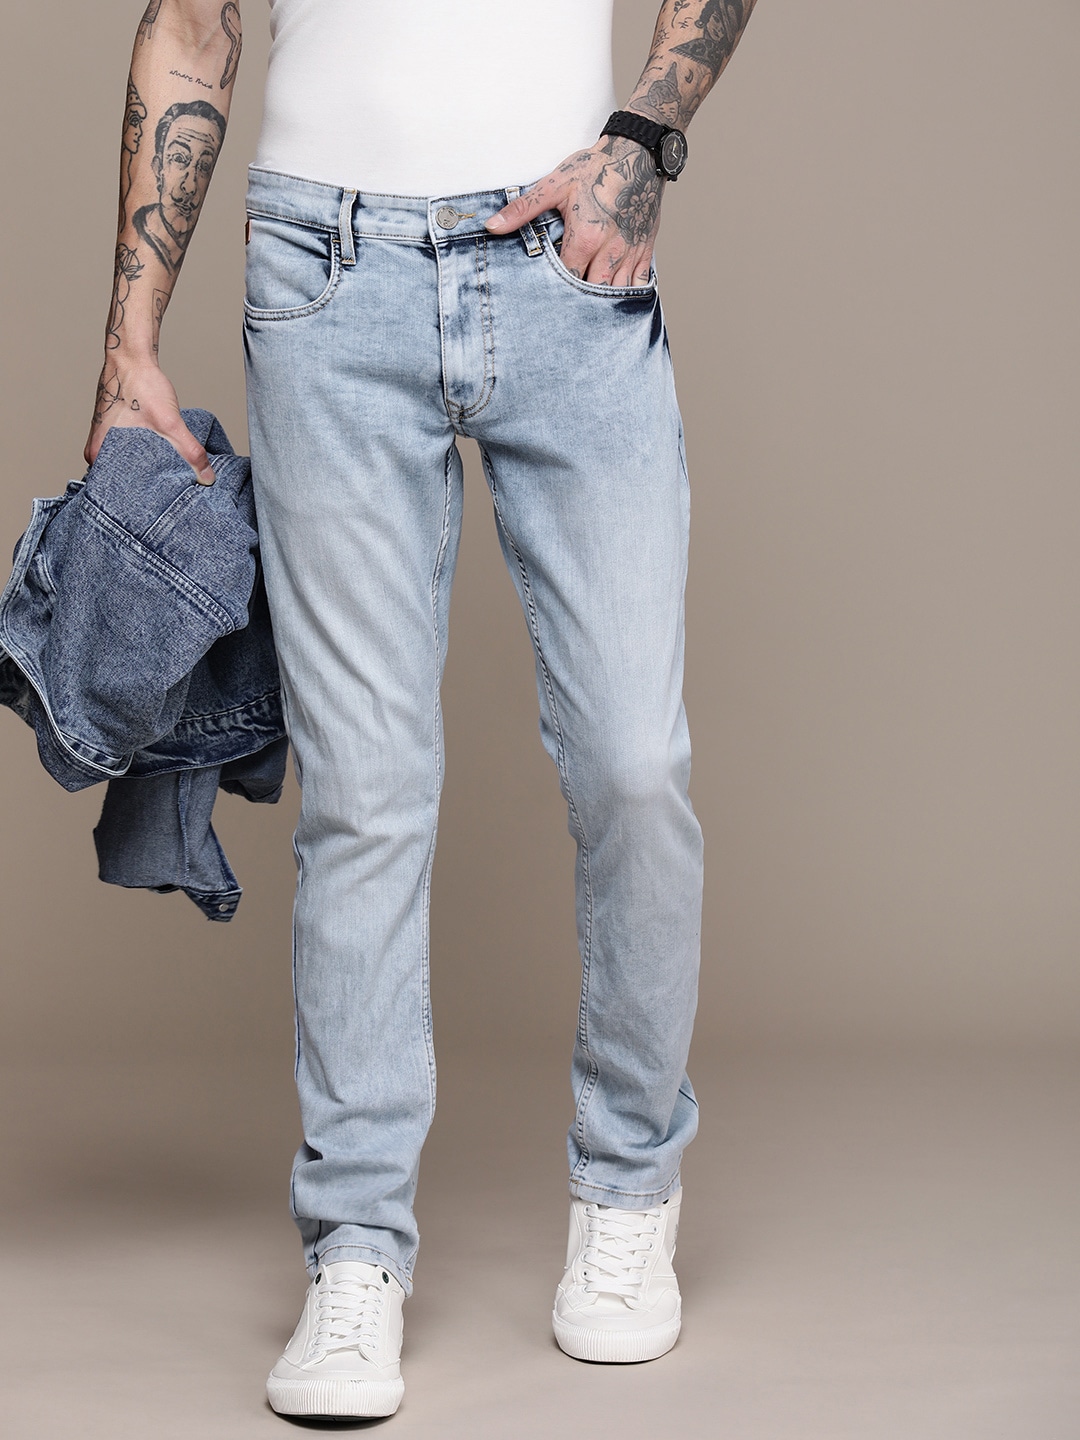 WROGN Men Slim Fit Heavy Fade Stretchable Jeans